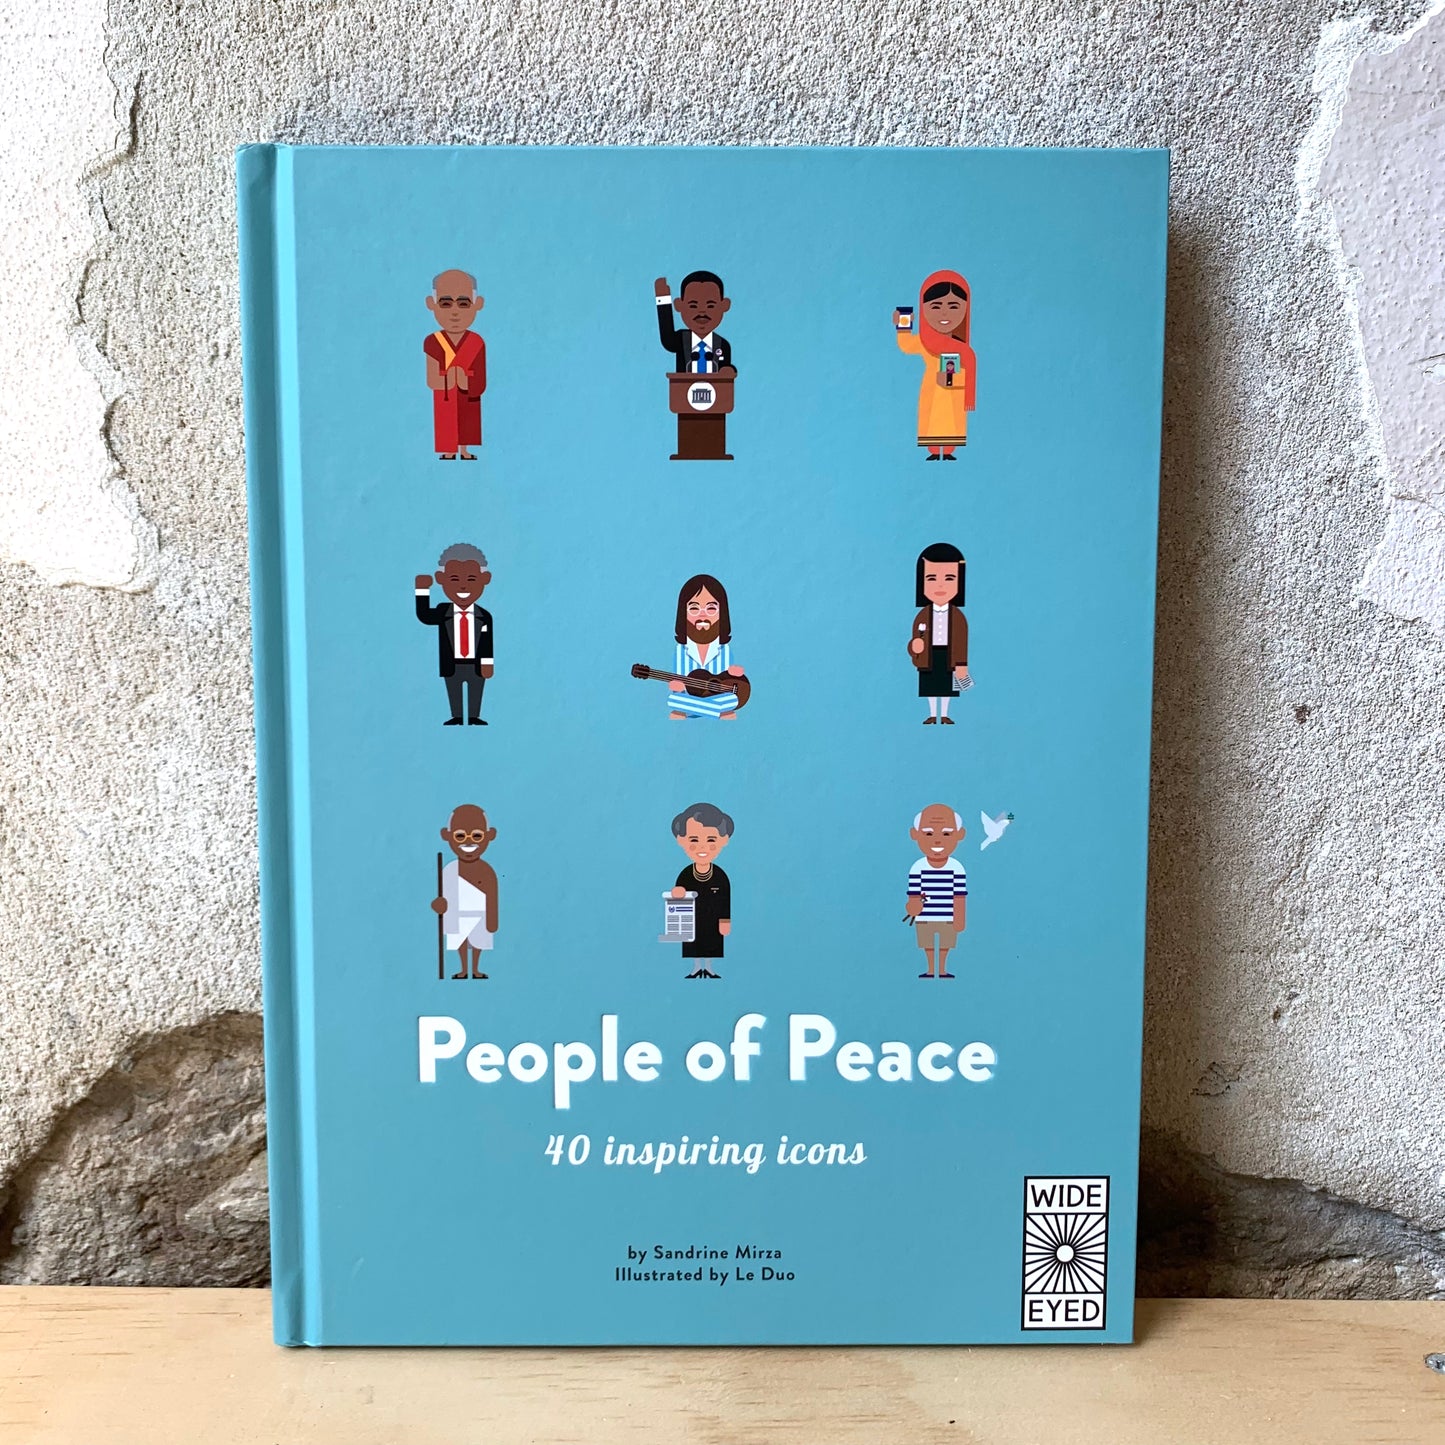 People of Peace - Sandrine Mirza, Le Duo